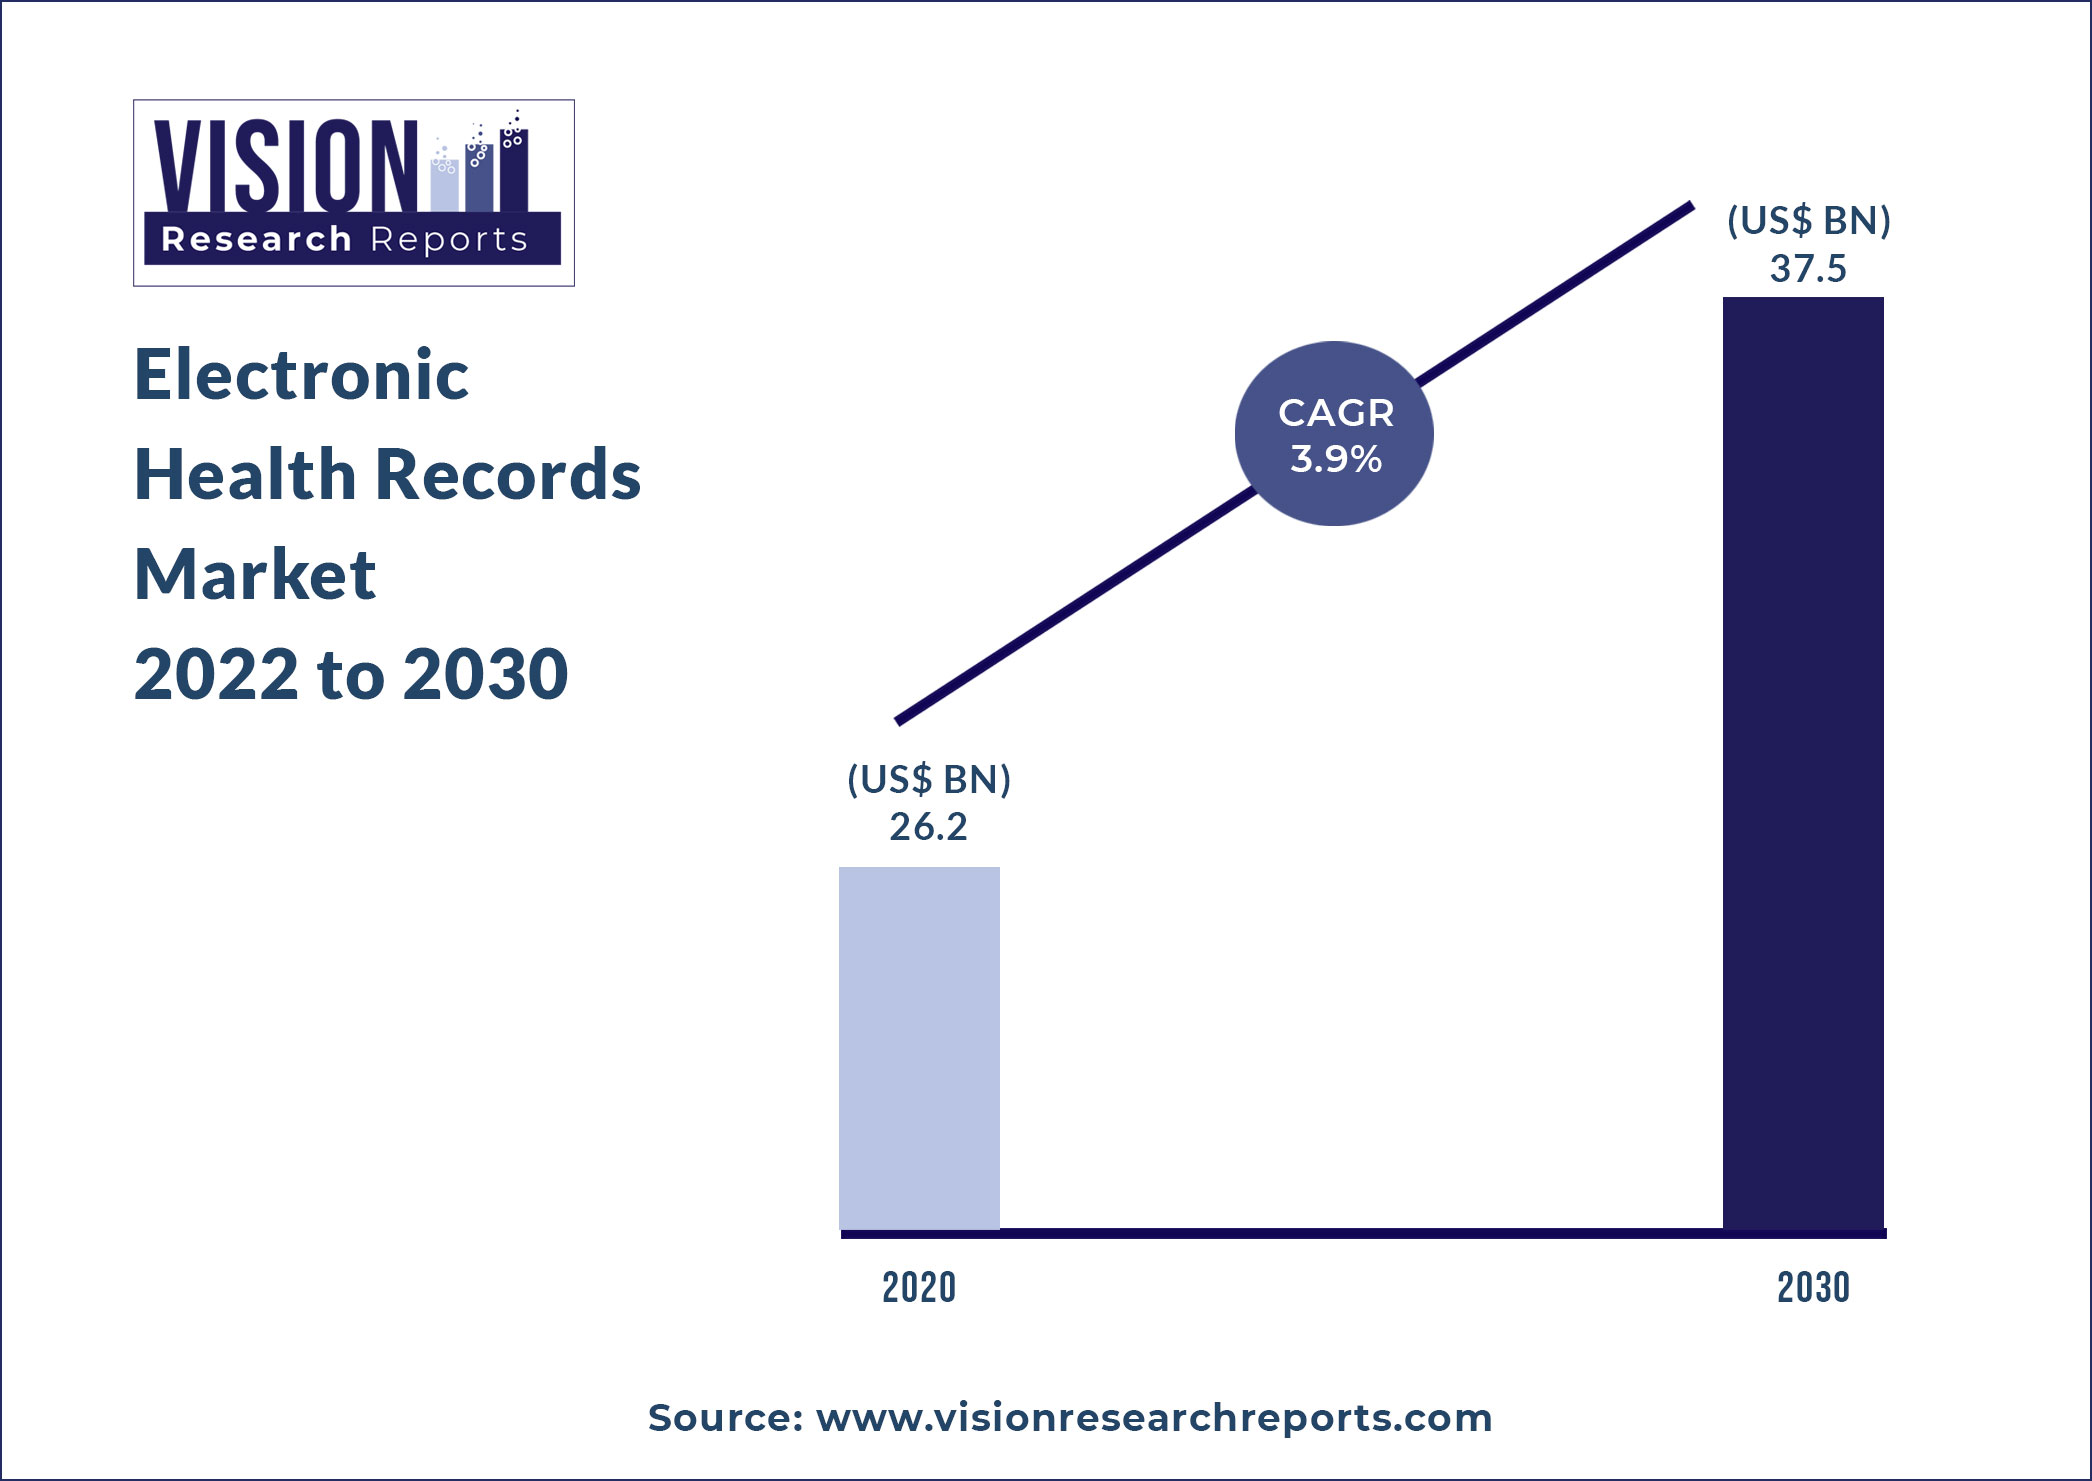 Electronic Health Records Market Size 2022 to 2030